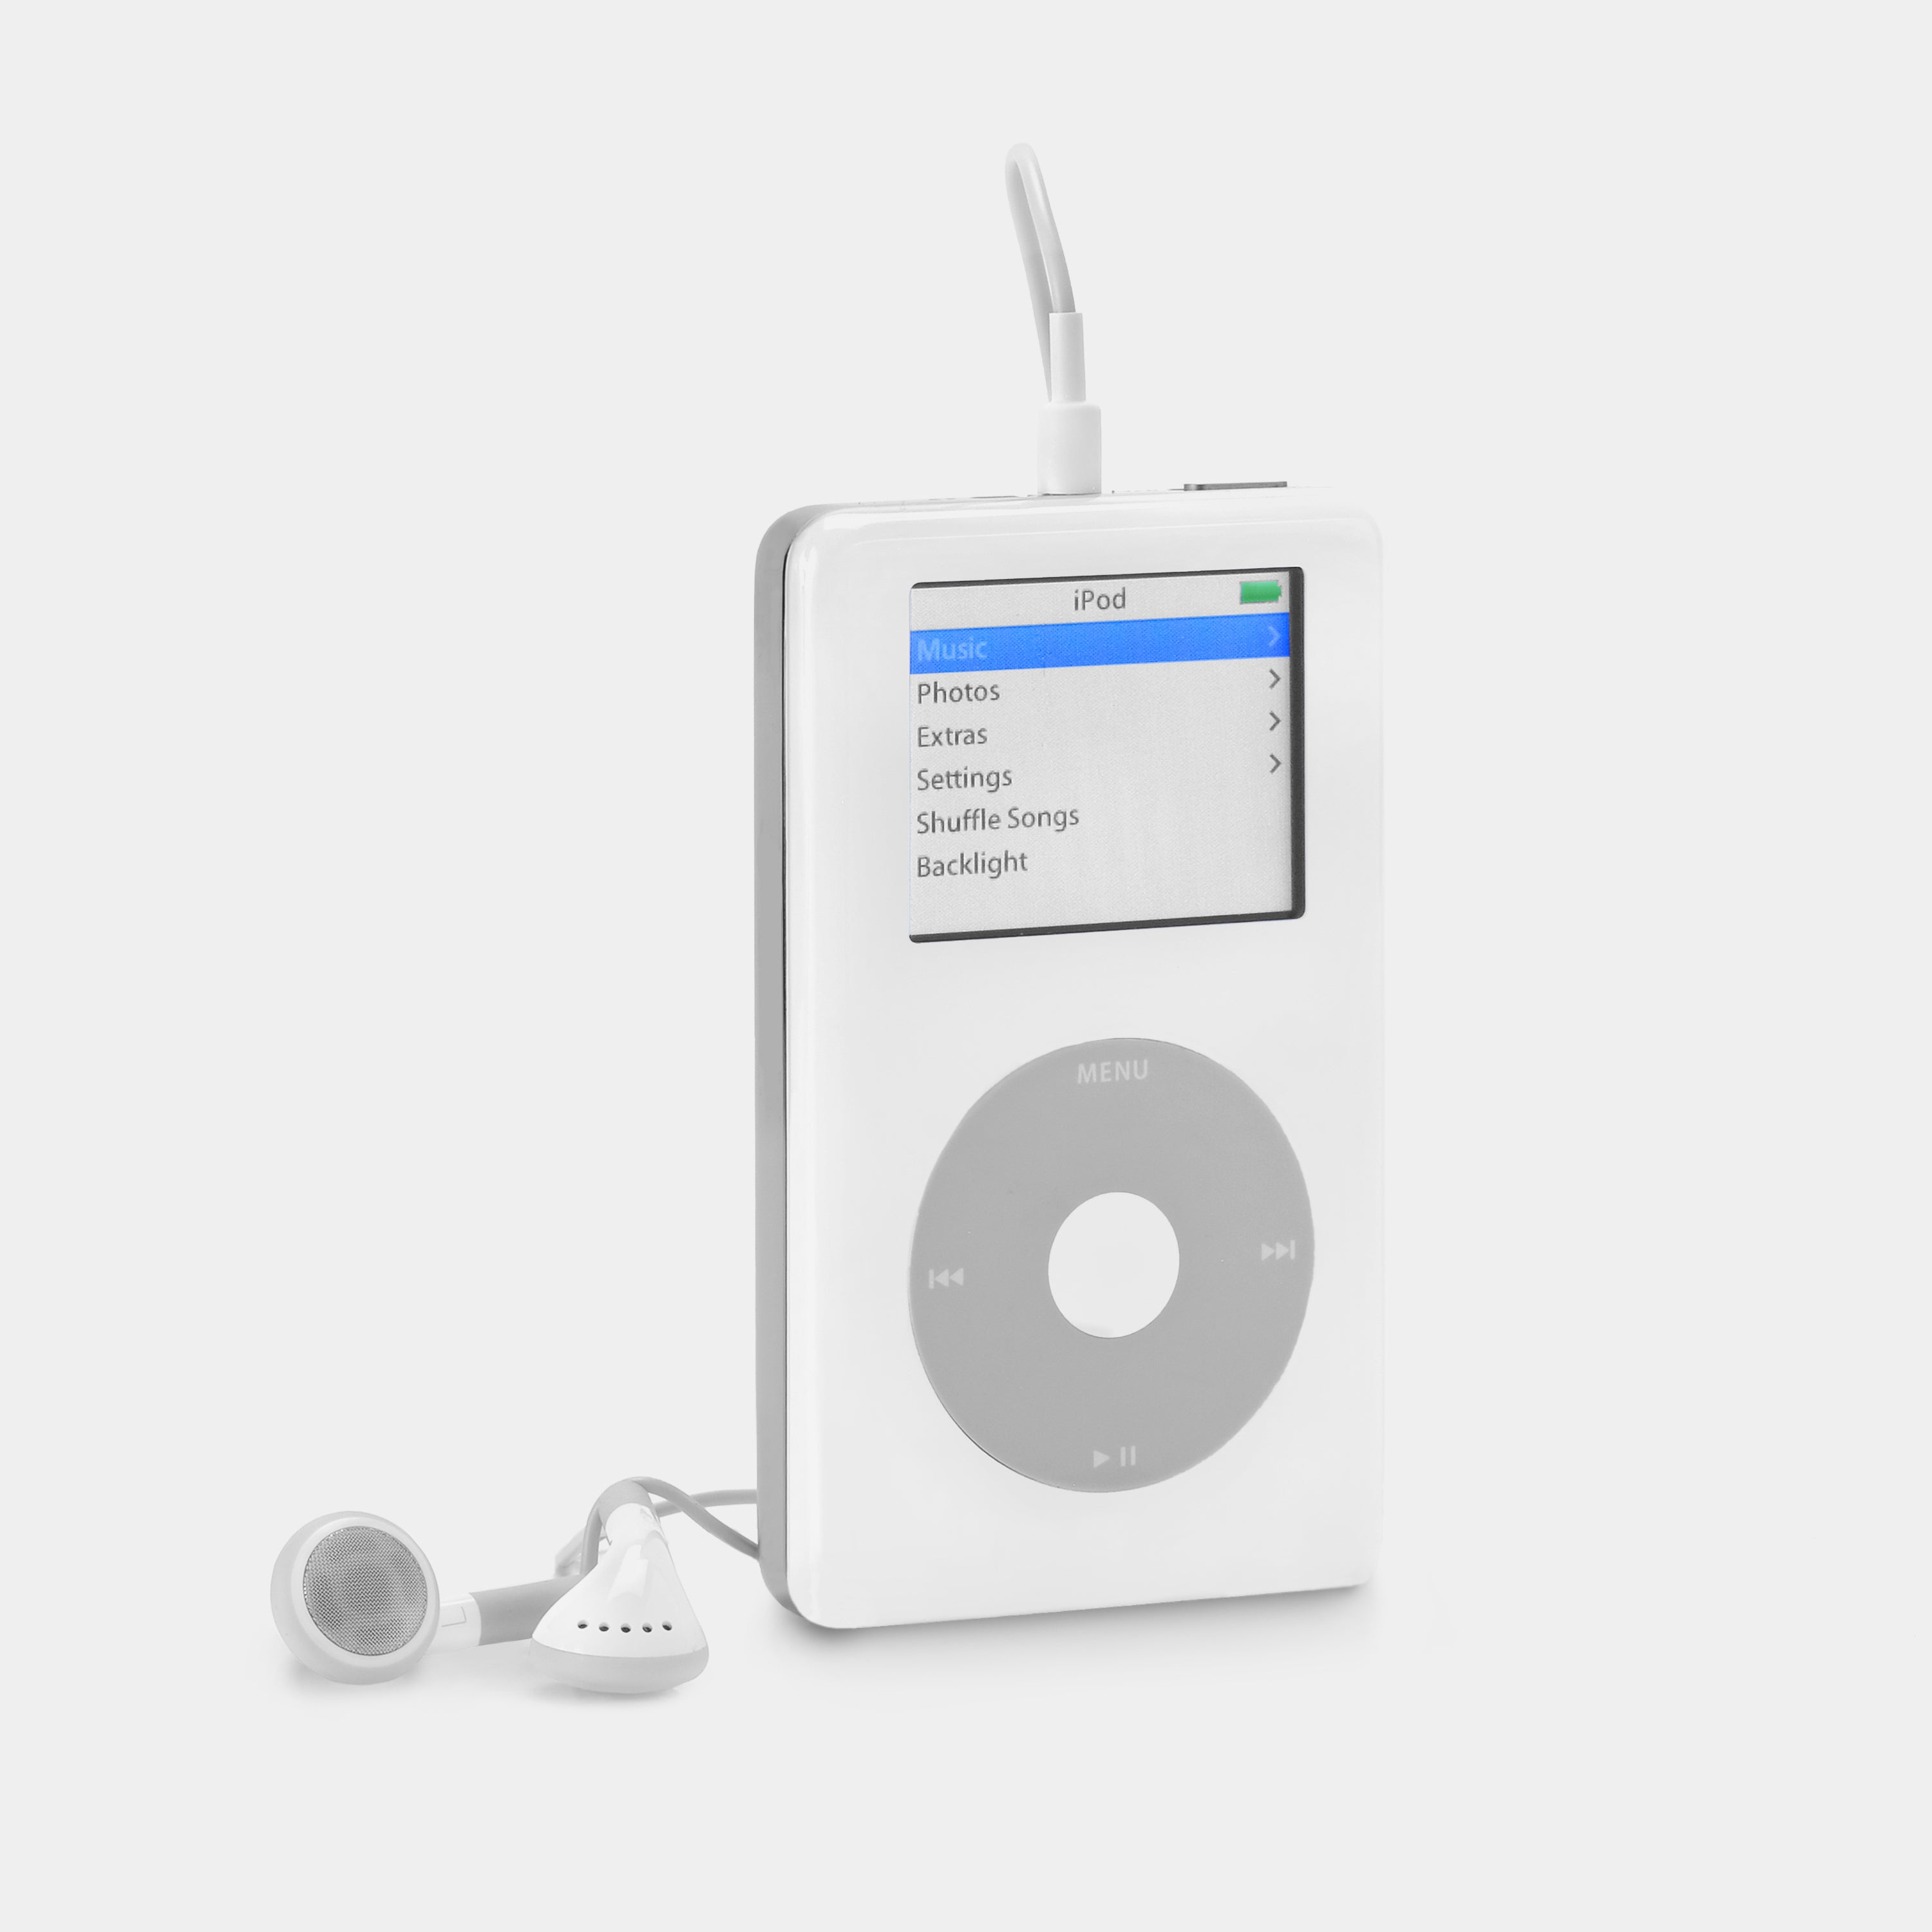 Apple iPod Color (4th Generation) MP3 Player